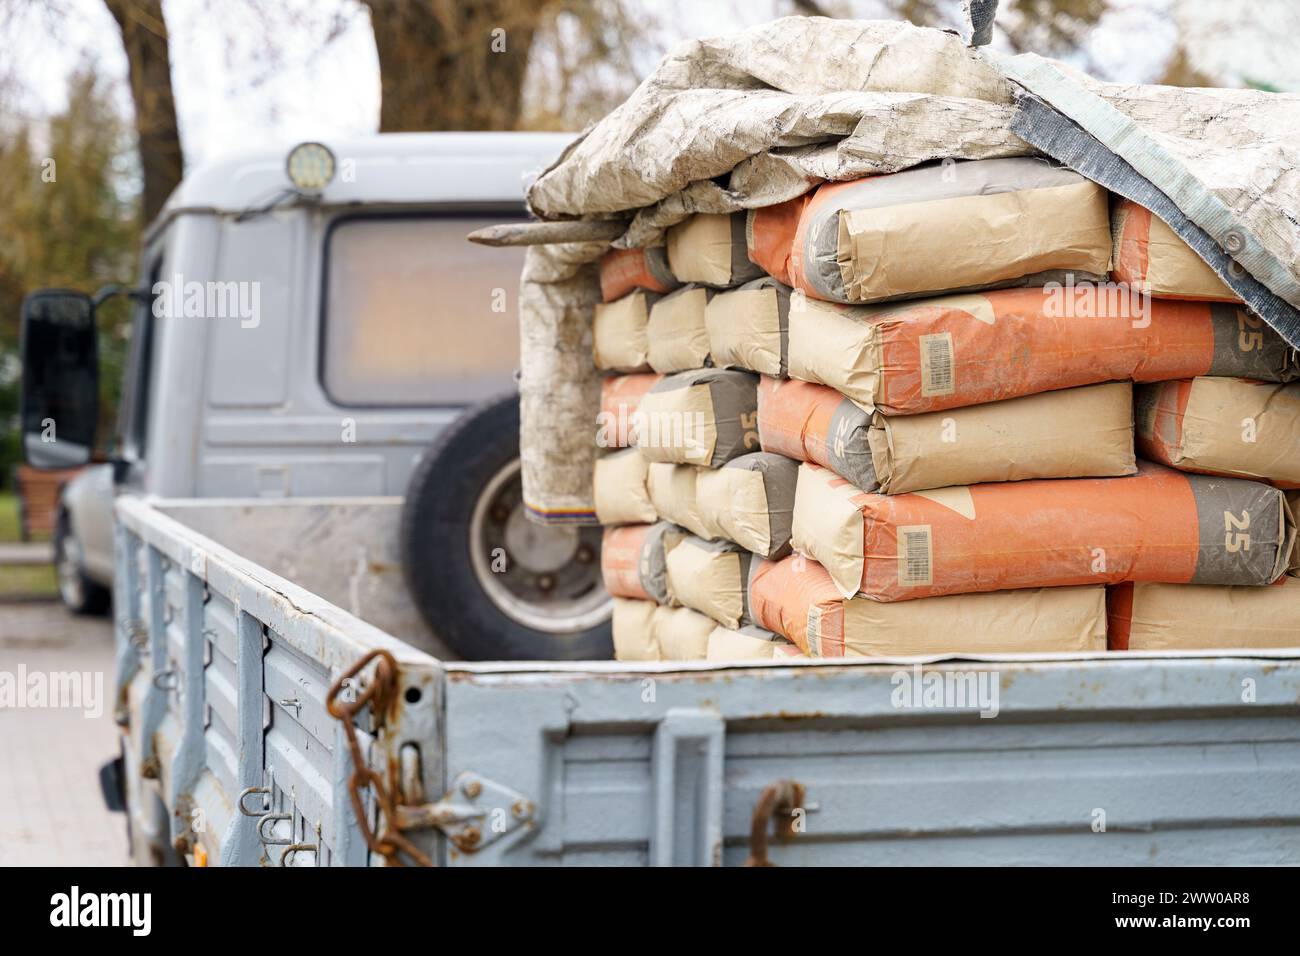 A pickup truck bed is filled with stacked cement bags, indicating ongoing construction work at a site. Stock Photo